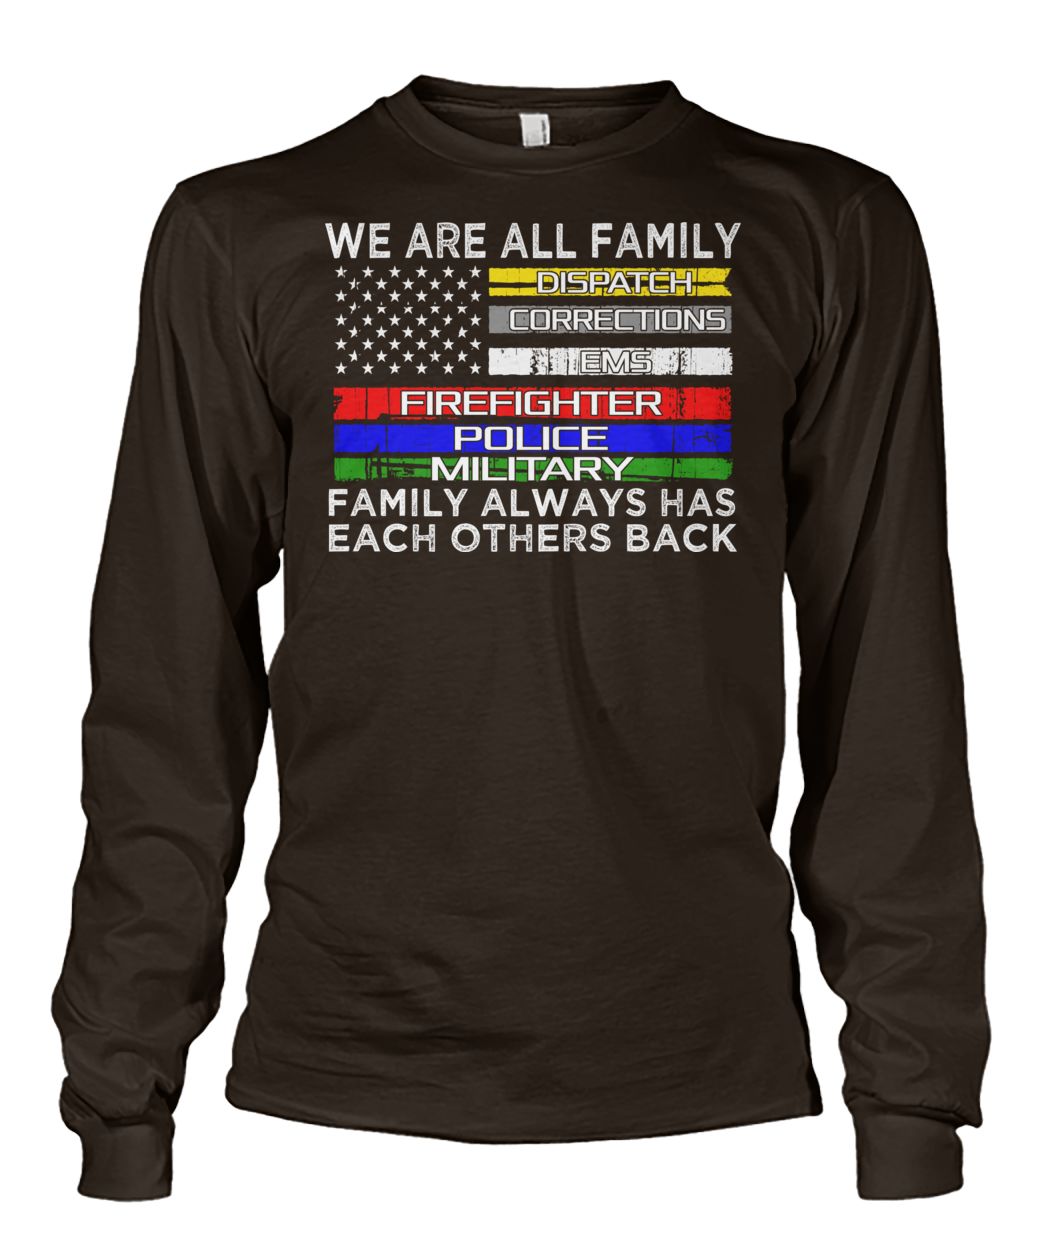 We are all family dispatch corrections emt firefighter police military unisex long sleeve